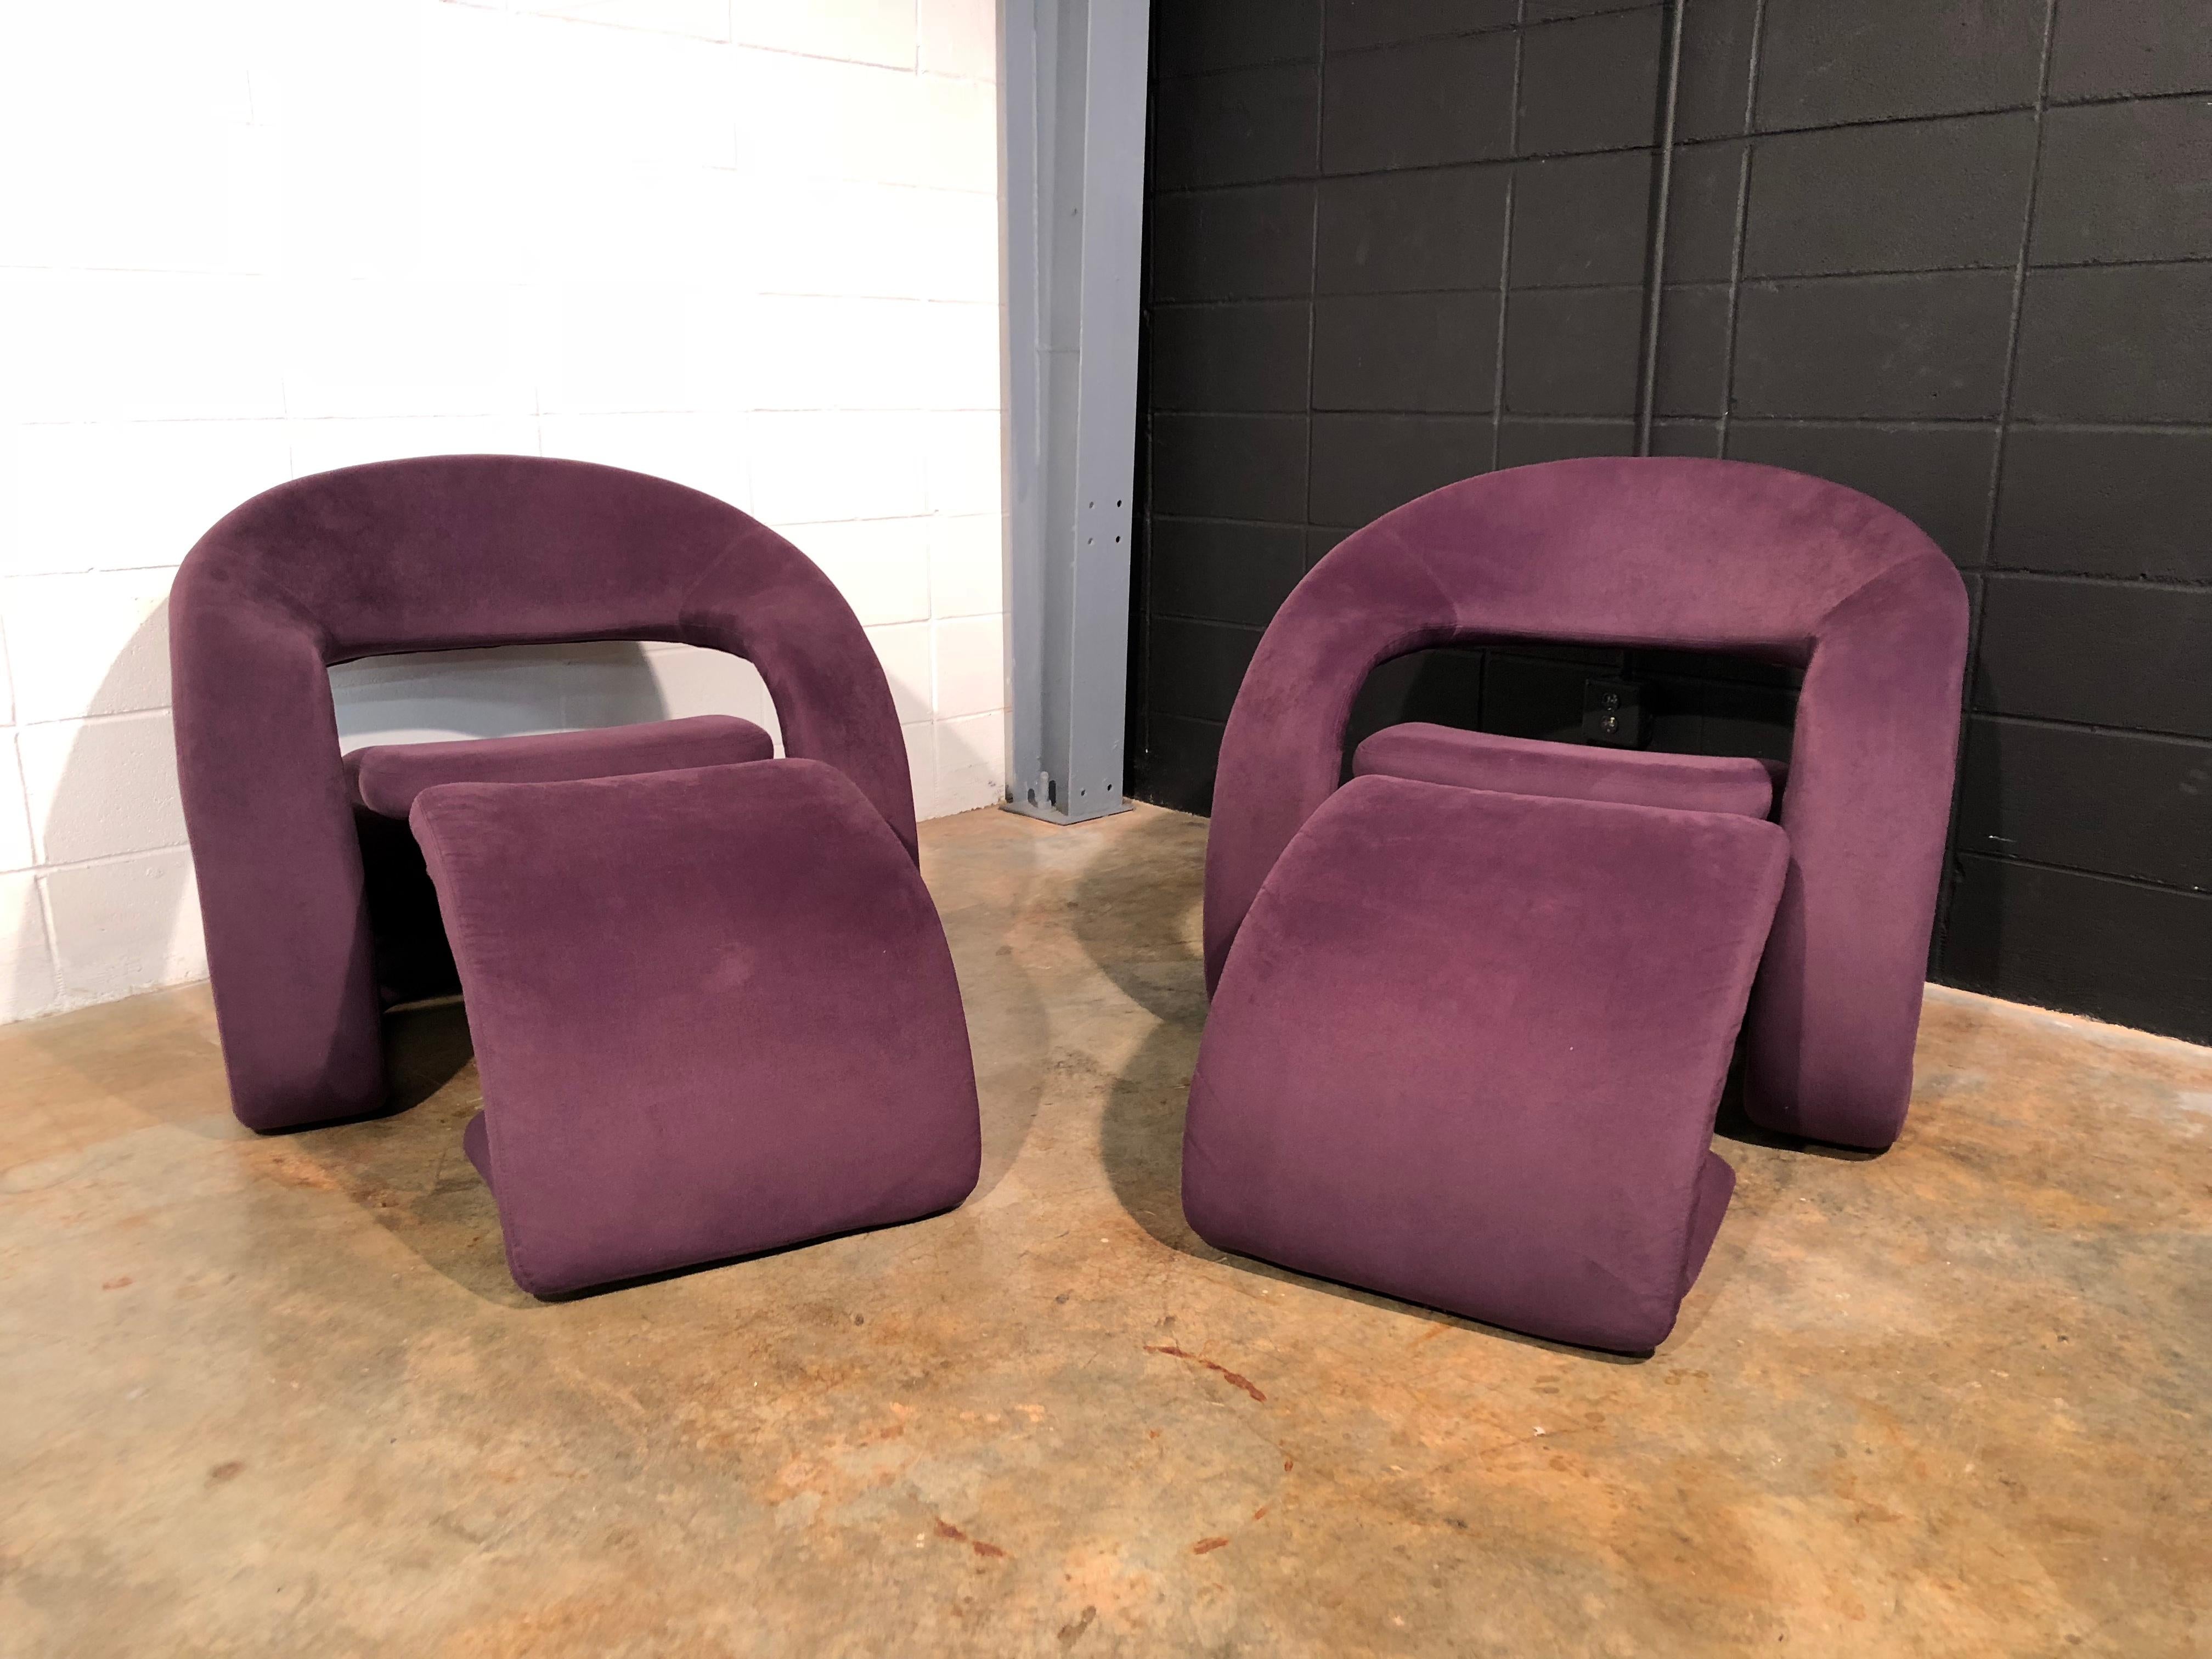 Pair of Sculptural Cantilever Chairs with Ottoman Memphis Style 8